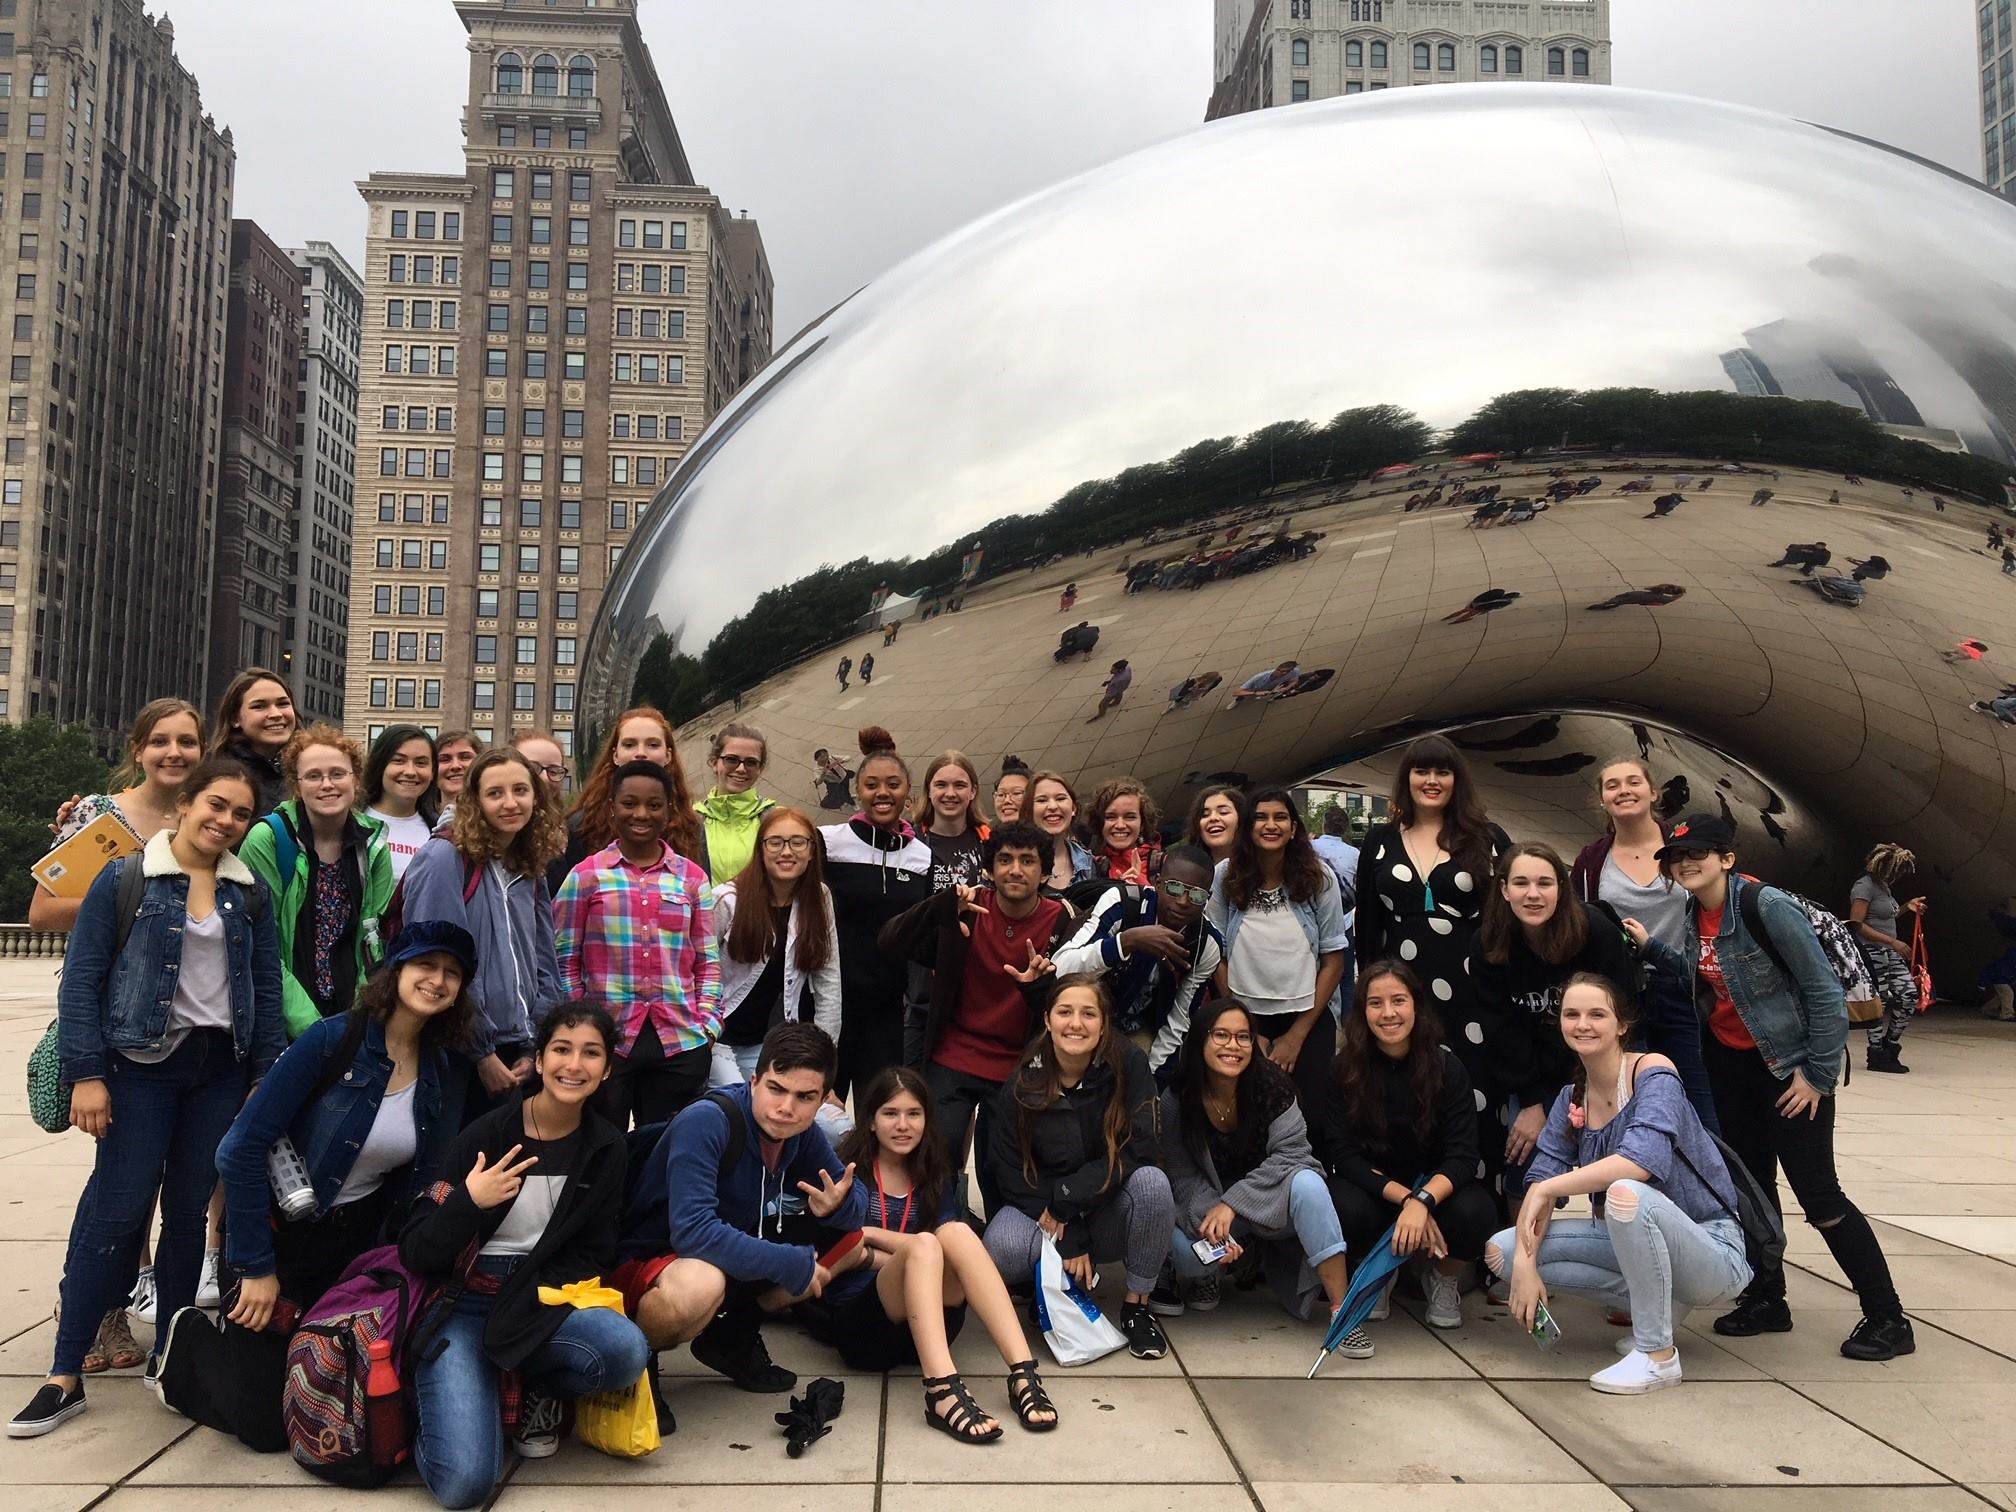 Student group in front of Chicago bean sculpture